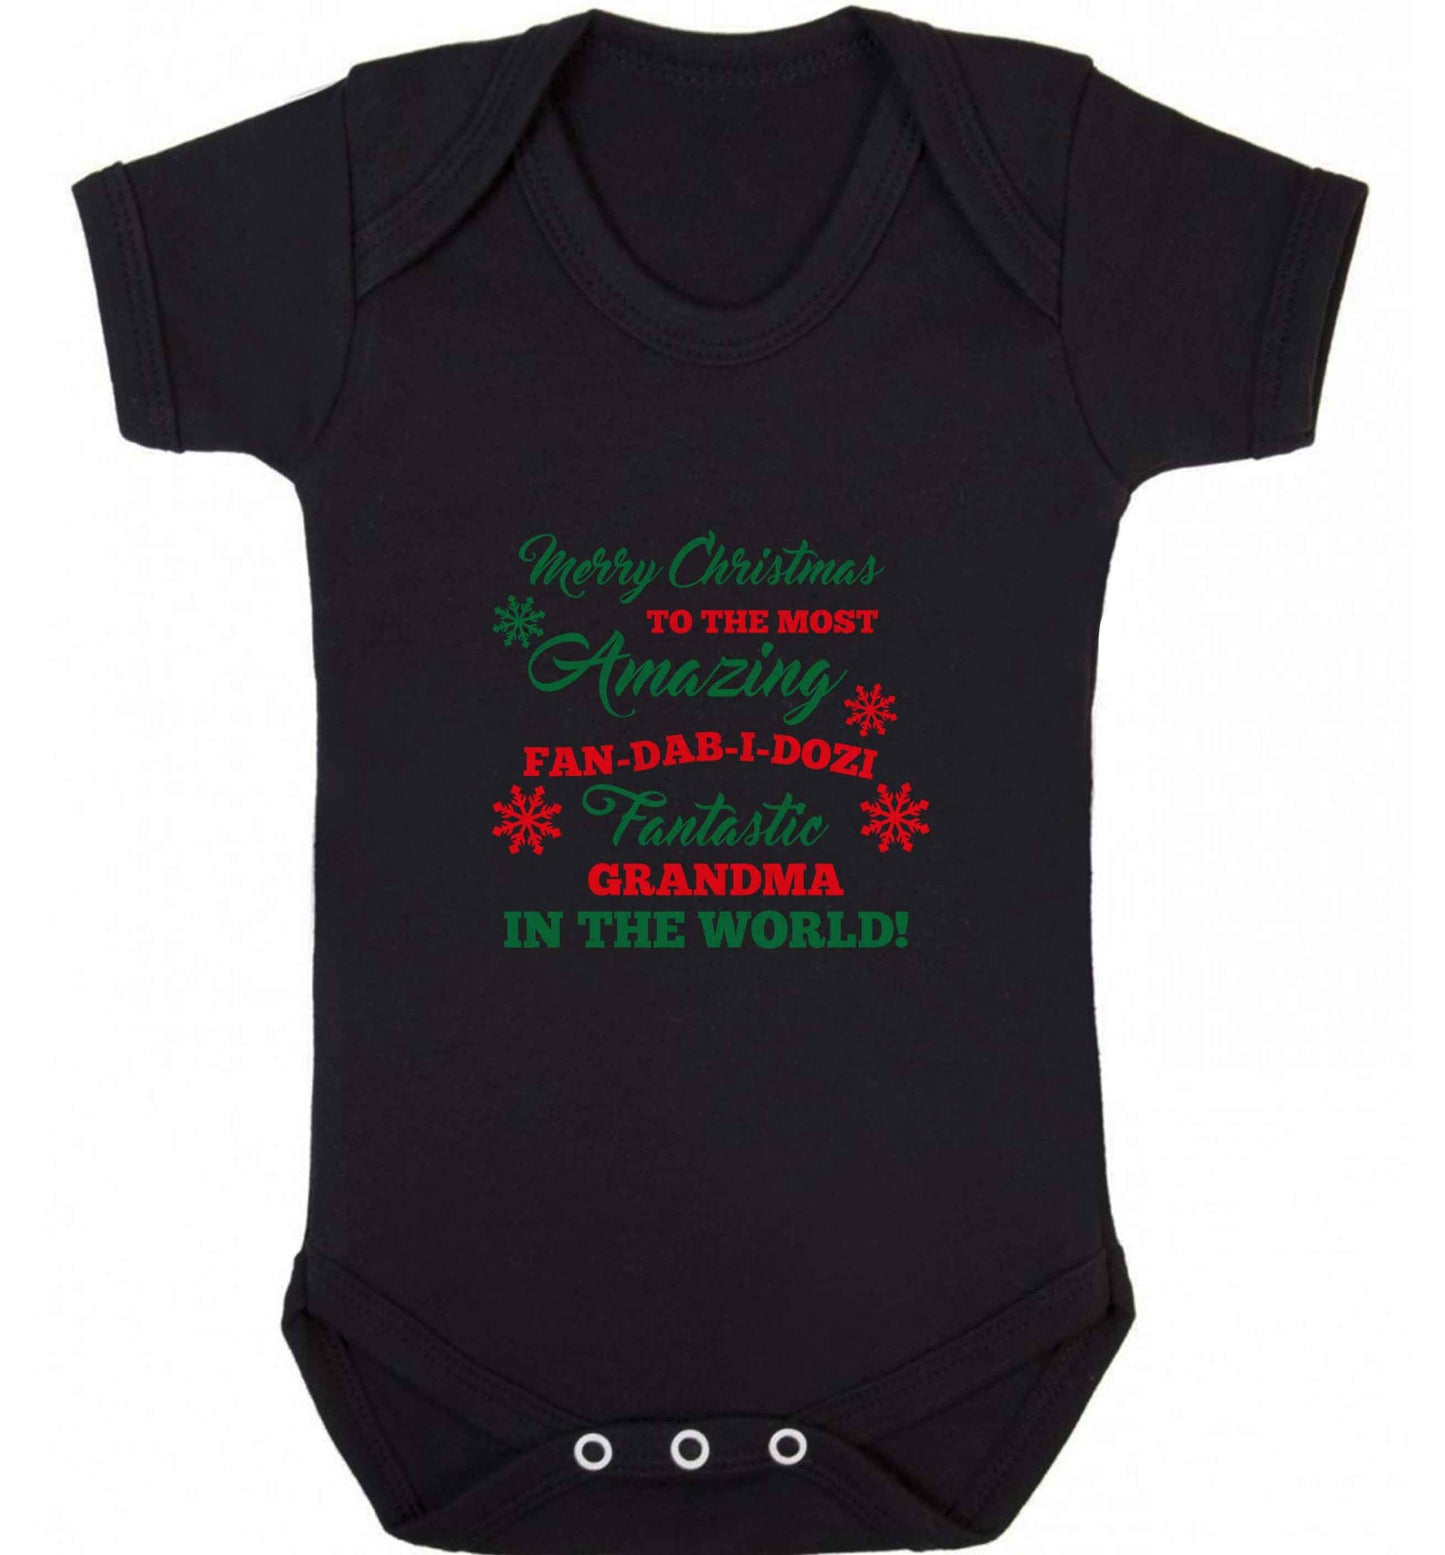 Merry Christmas to the most amazing fan-dab-i-dozi fantasic Grandma in the world baby vest black 18-24 months